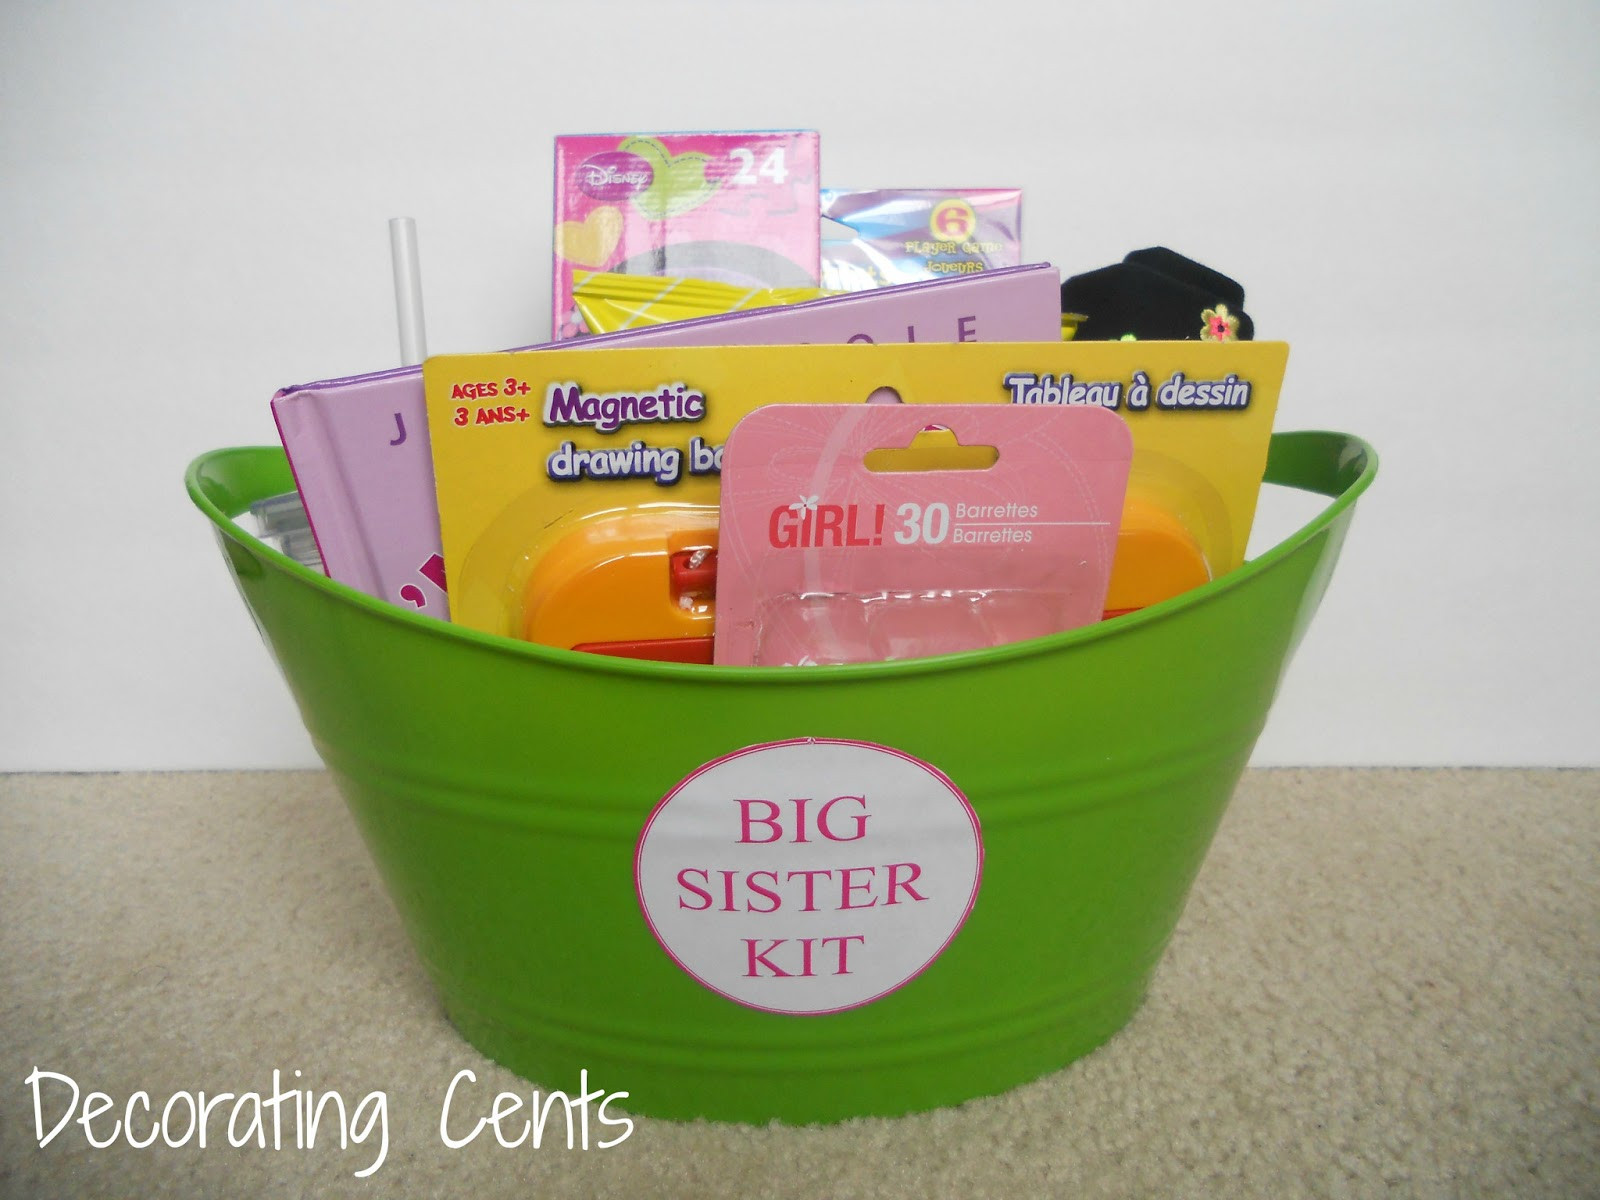 Gift Ideas For Big Sister From New Baby
 Big Sister Kit